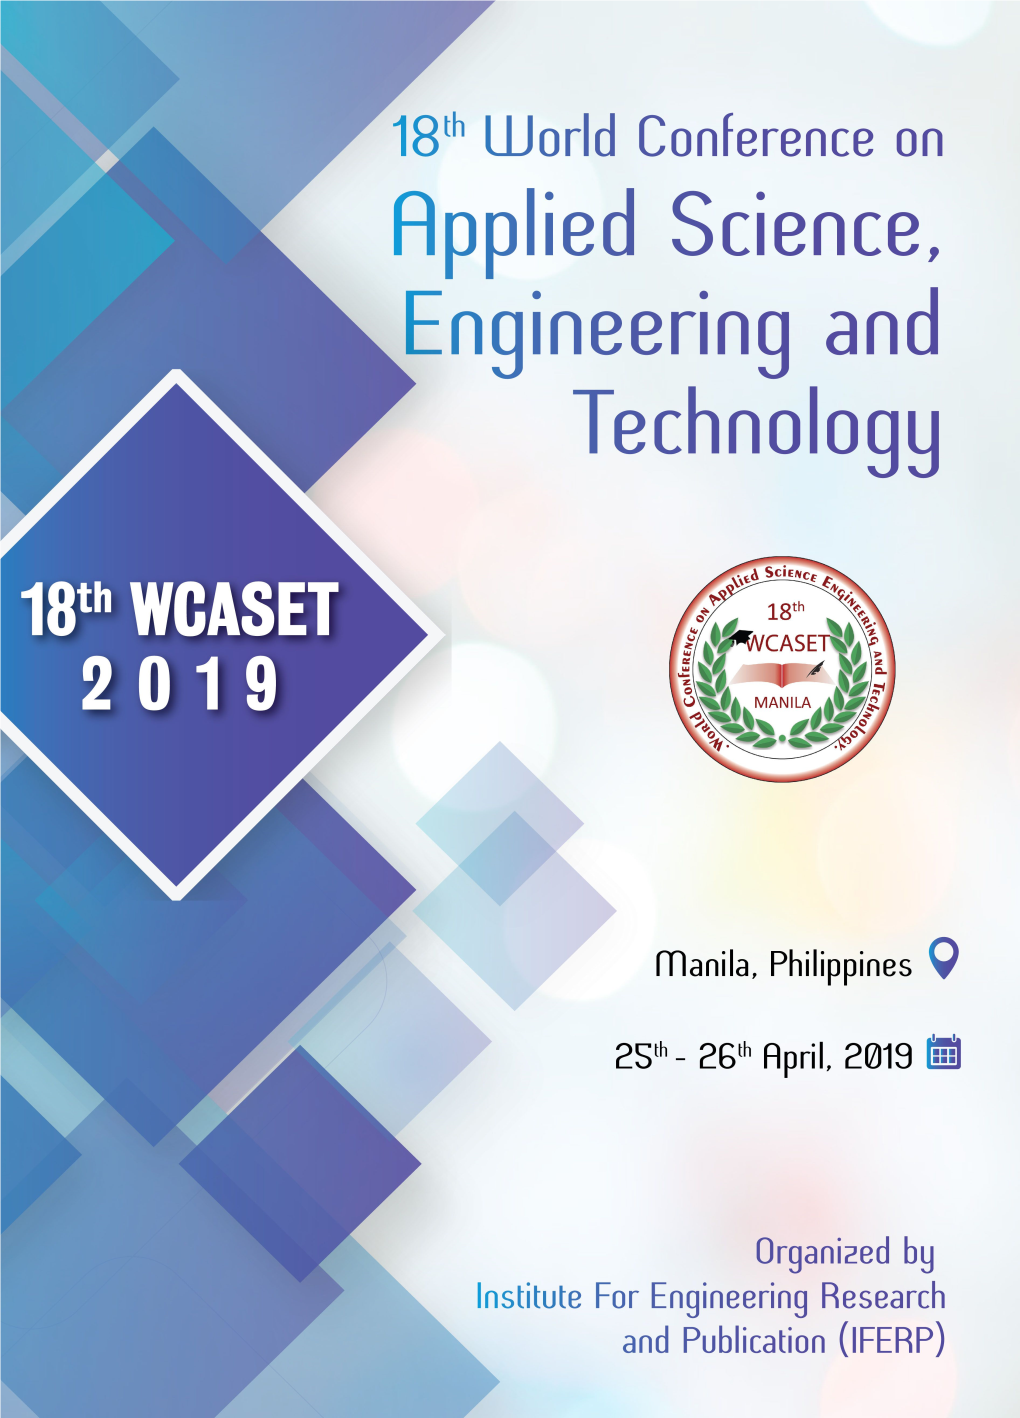 World Conference on Applied Science, Engineering and Technology (WCASET – 19)